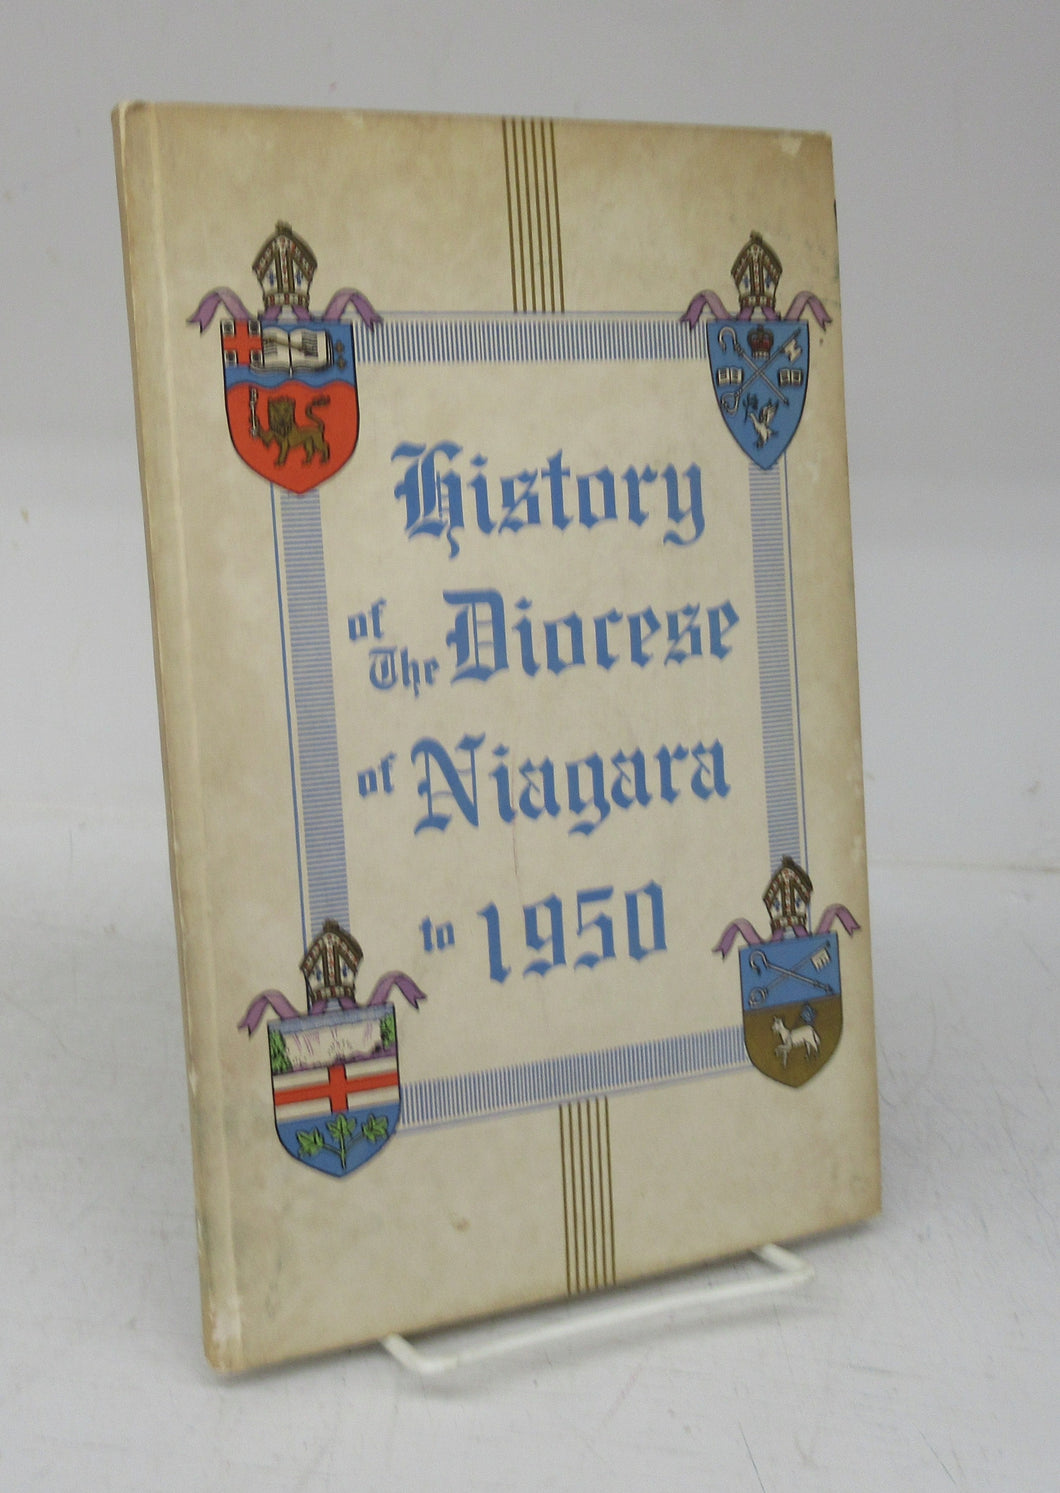 History of The Diocese of Niagara to 1950 A.D.